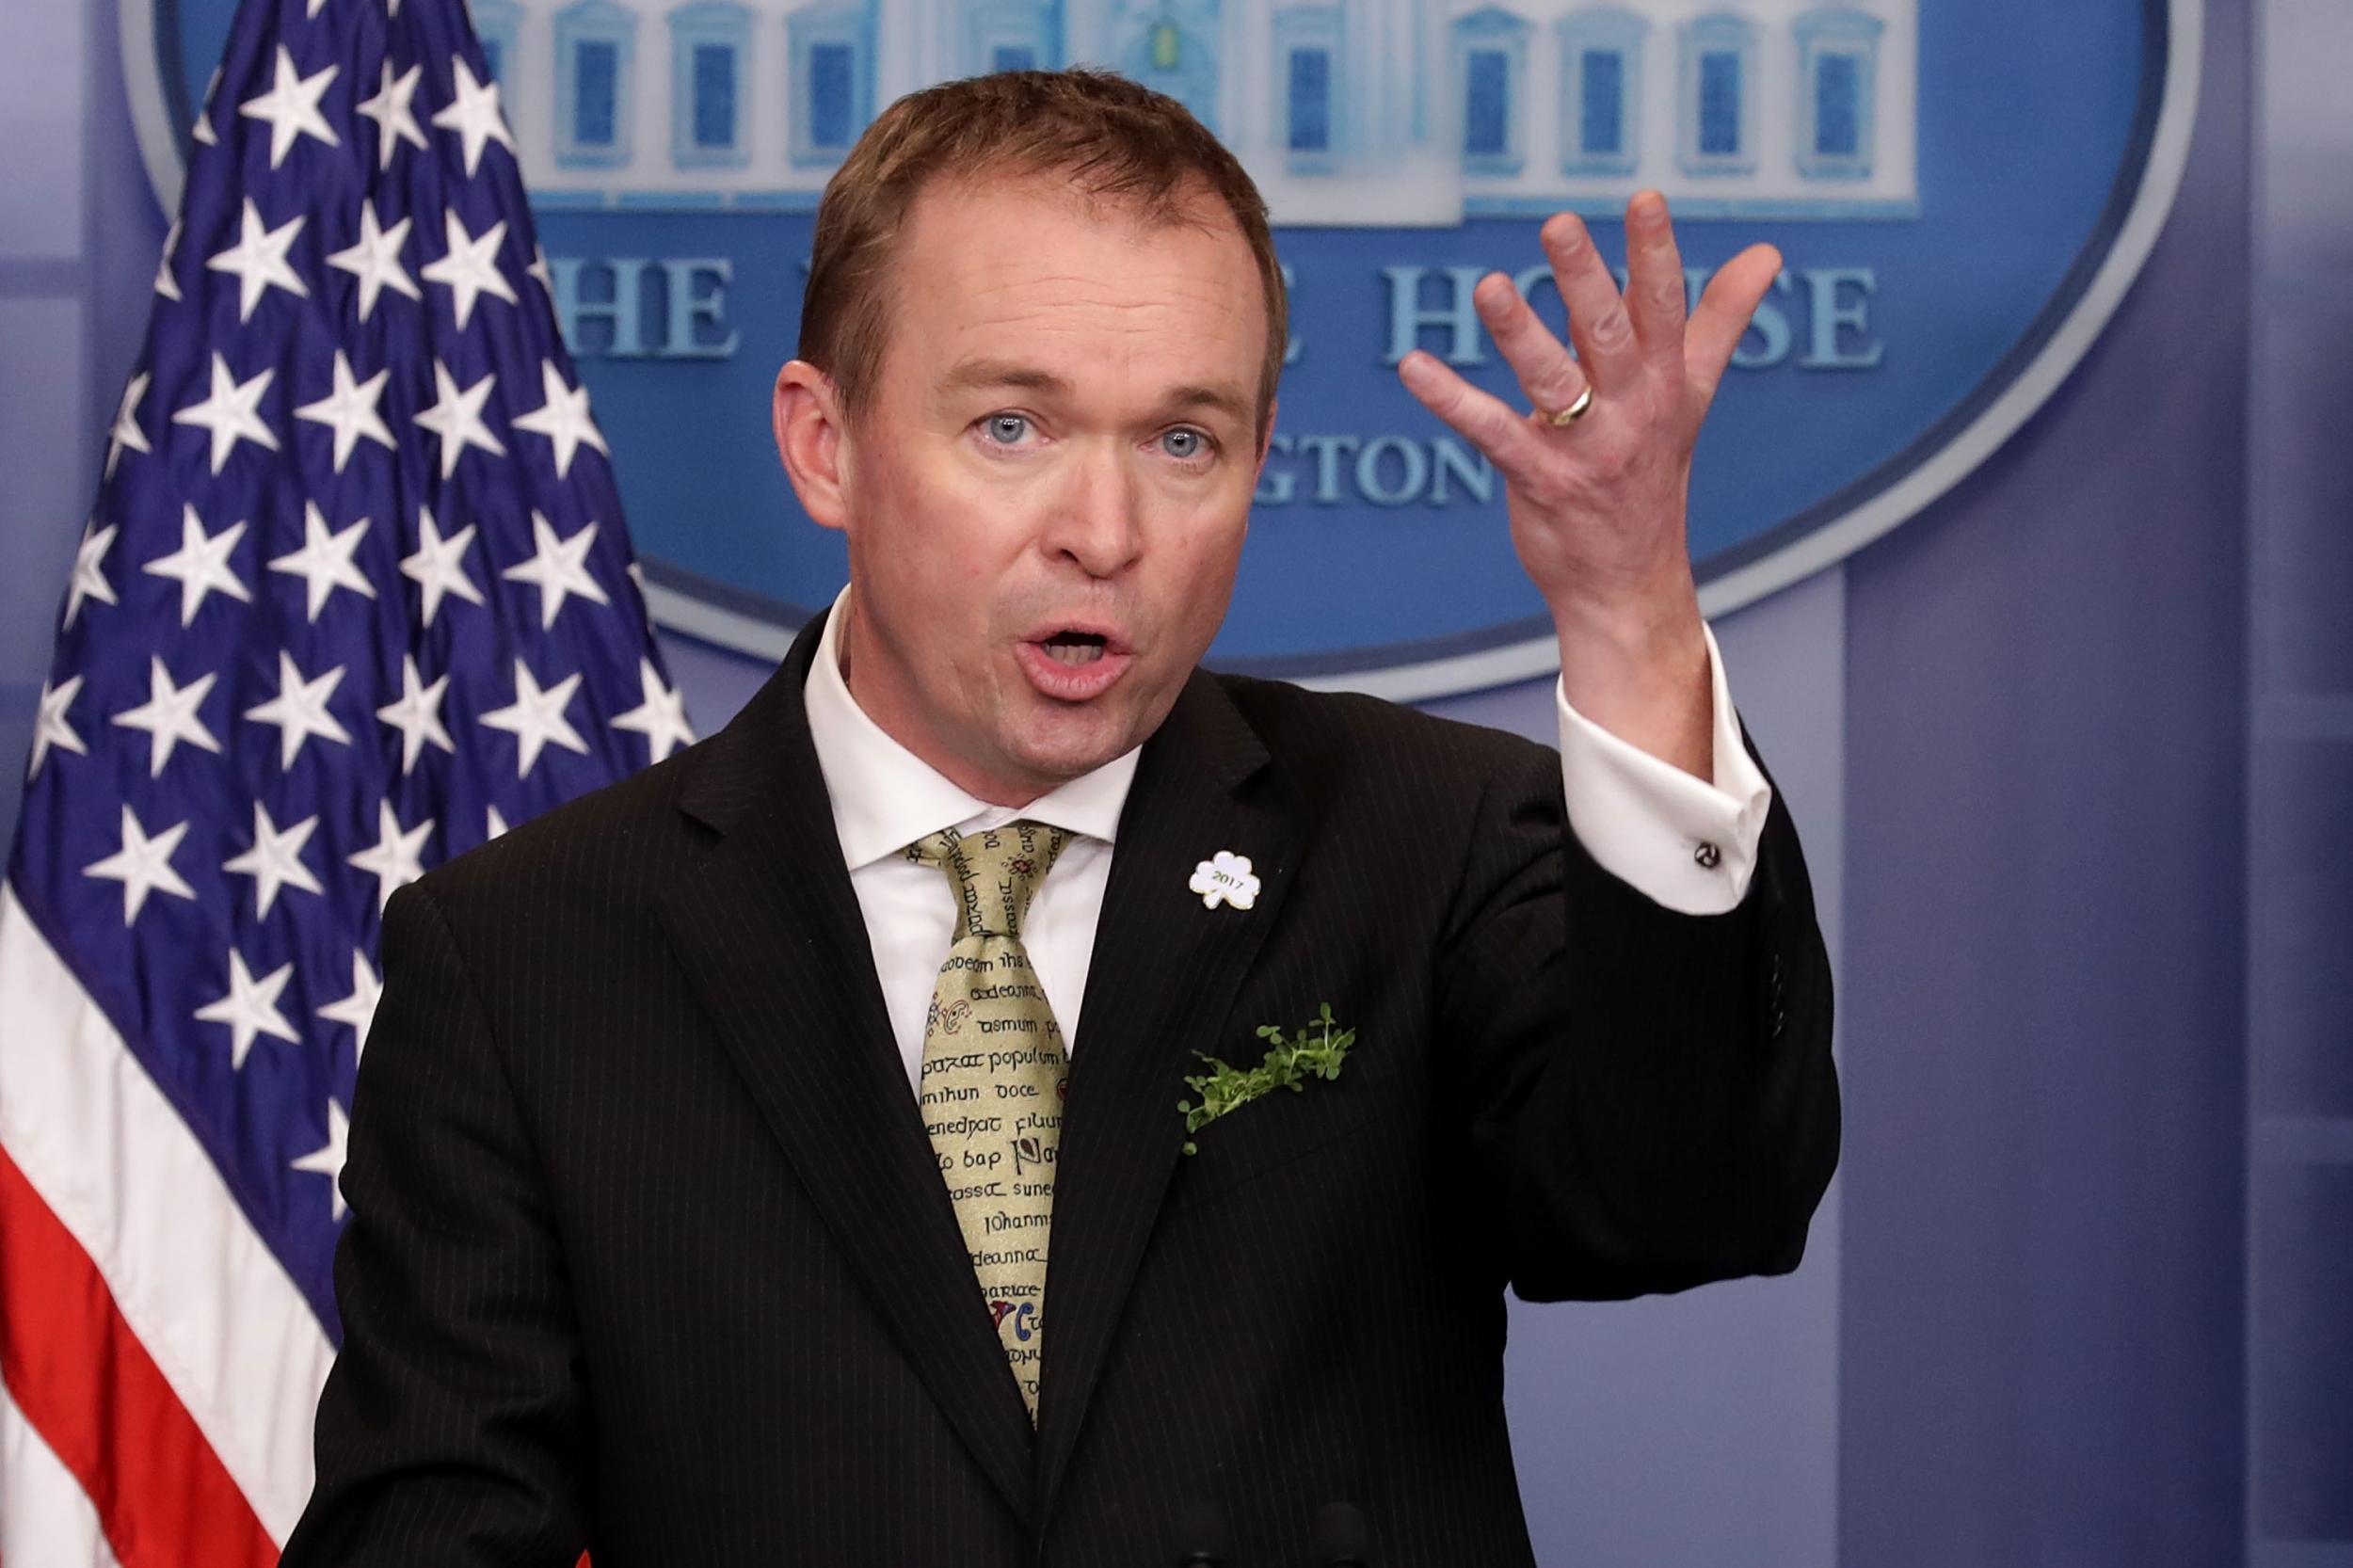 Budget Director Mick Mulvaney said the federal hiring freeze is lifted but agencies will still need to make deep personnel cuts